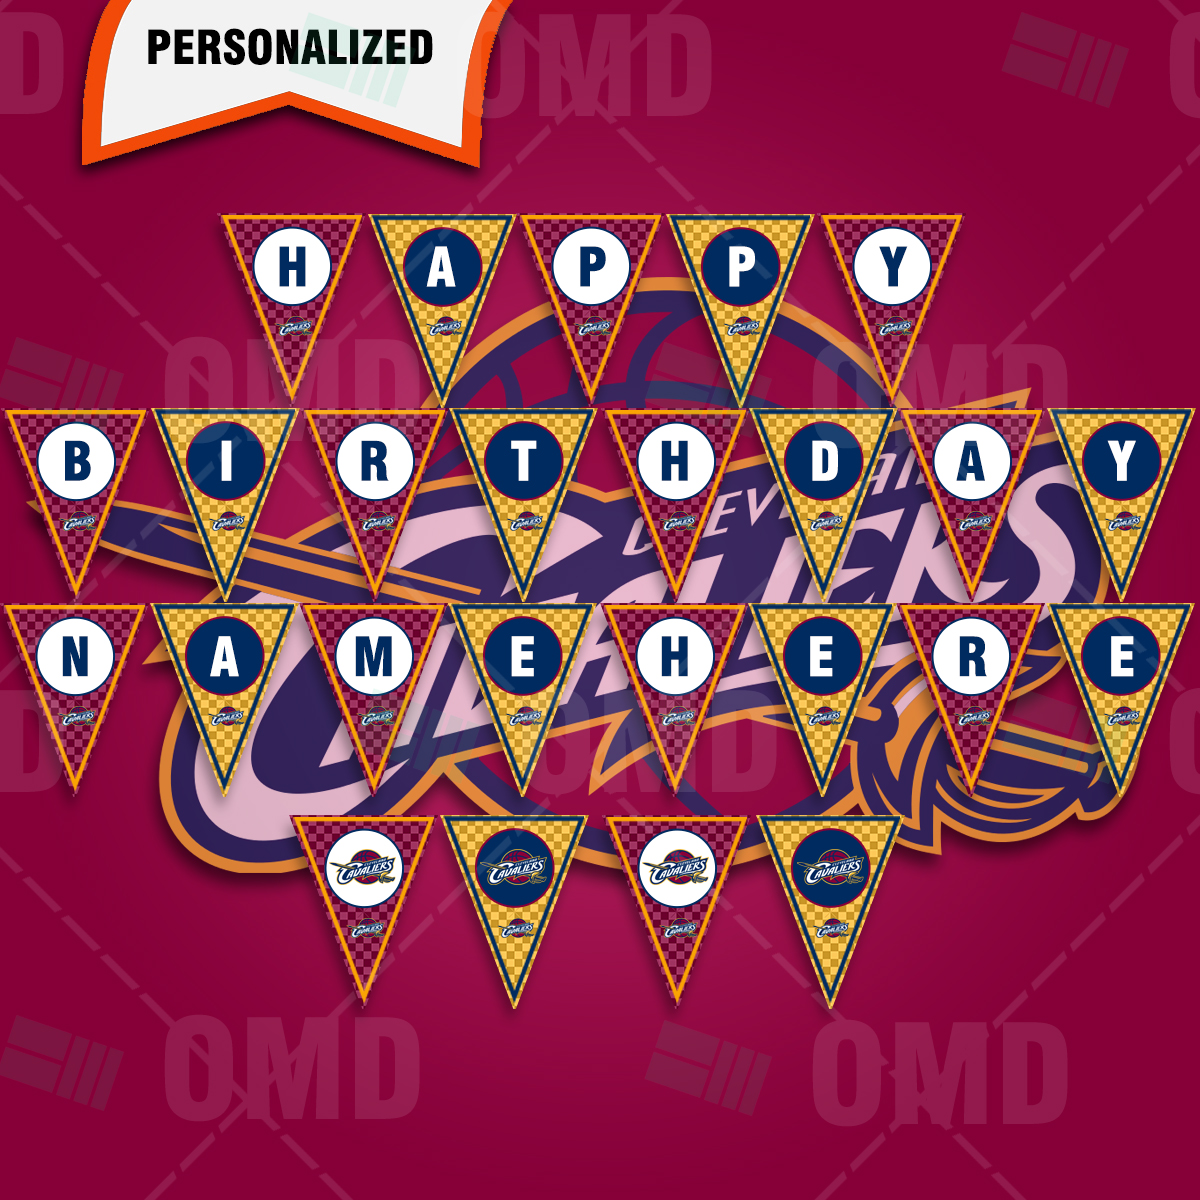 Cleveland Cavaliers Team Logo Edible Cupcake Topper Images ABPID55934 – A  Birthday Place